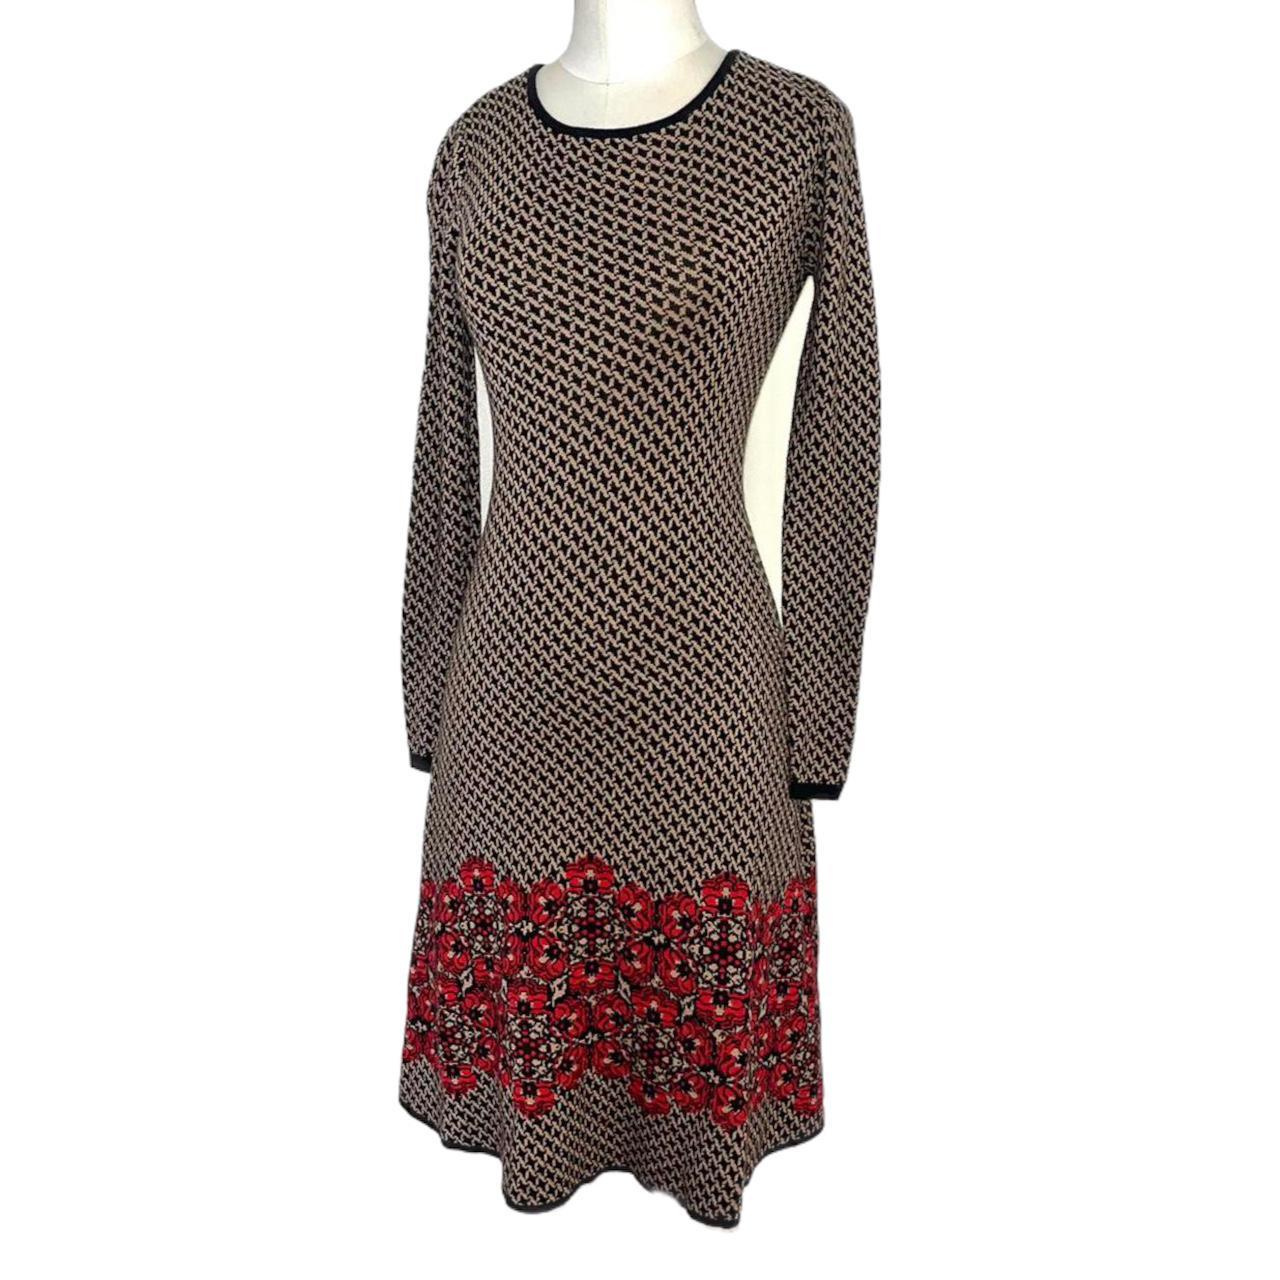 Product Image 1 - 90s STYLE LONG SLEEVE COZY